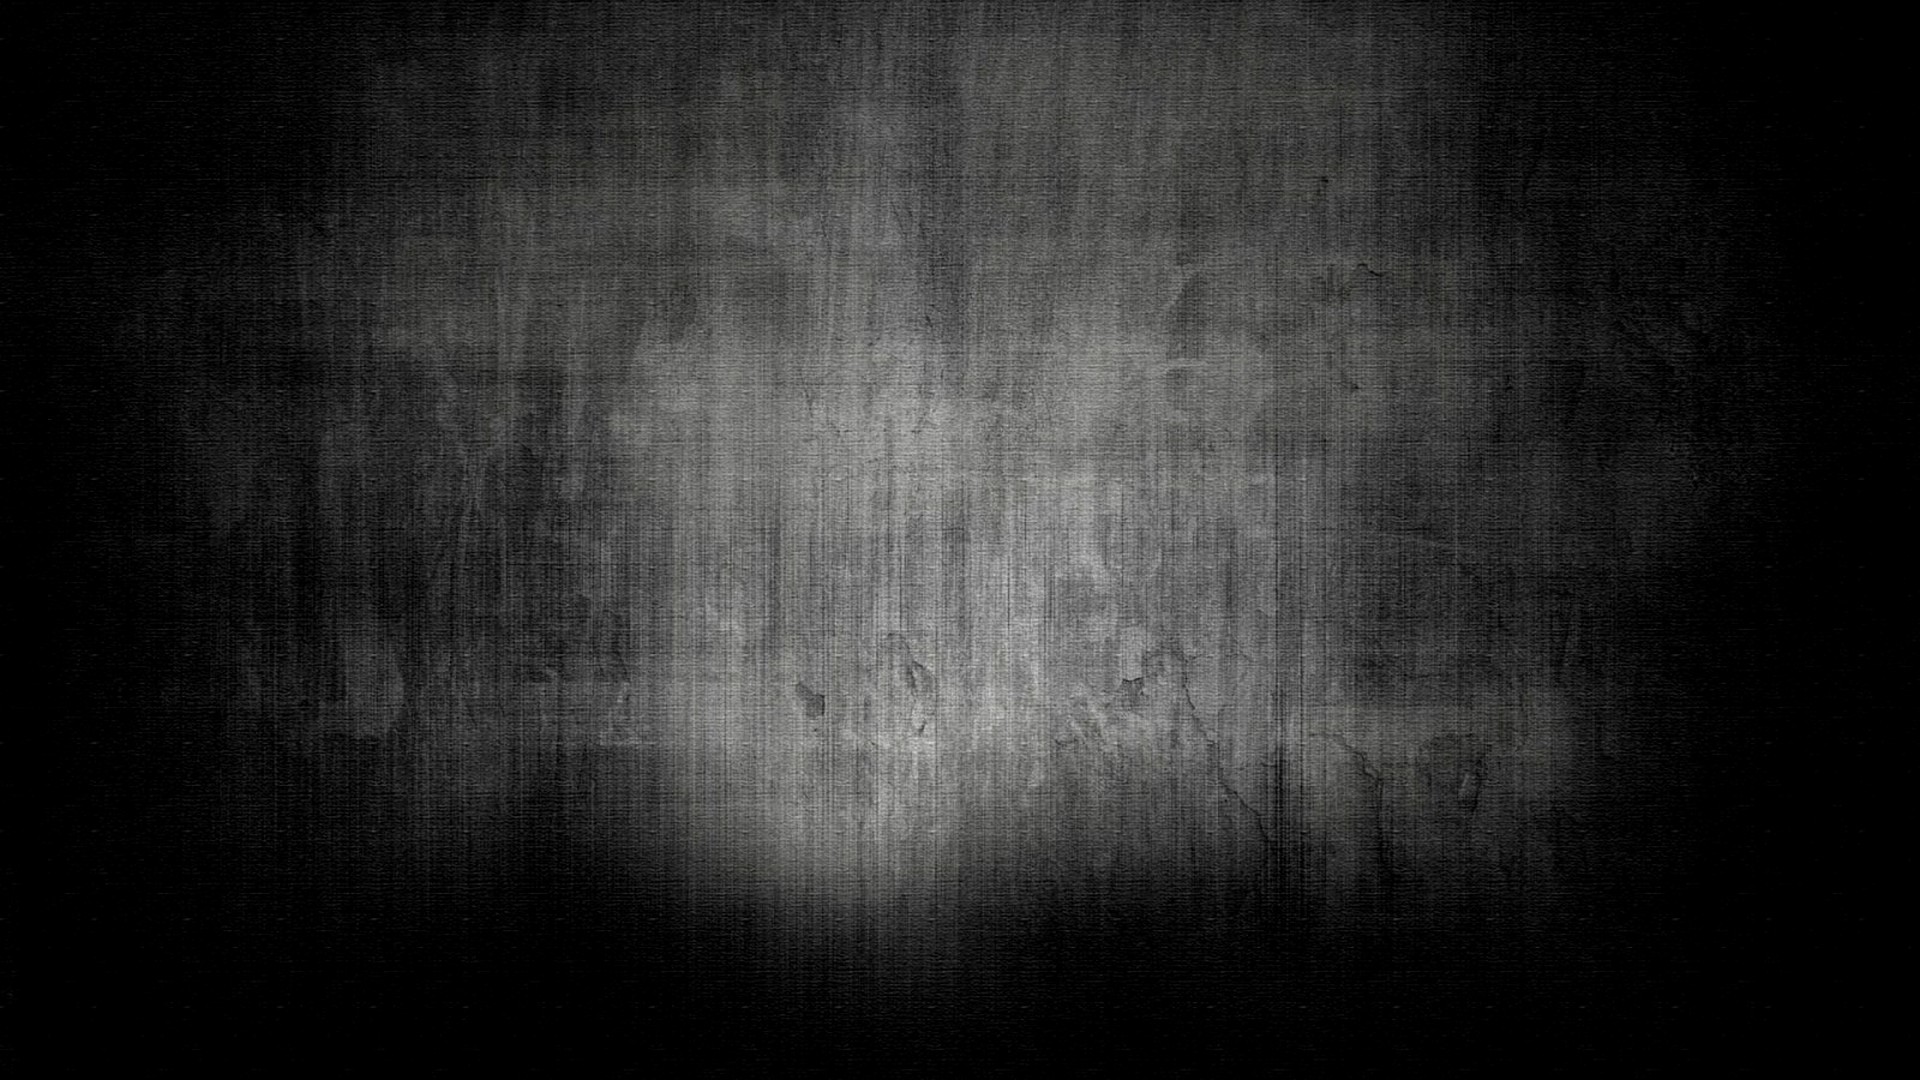 Best Cool Dark Wallpaper HD With high-resolution 1920X1080 pixel. You can use this wallpaper for your Desktop Computer Backgrounds, Mac Wallpapers, Android Lock screen or iPhone Screensavers and another smartphone device